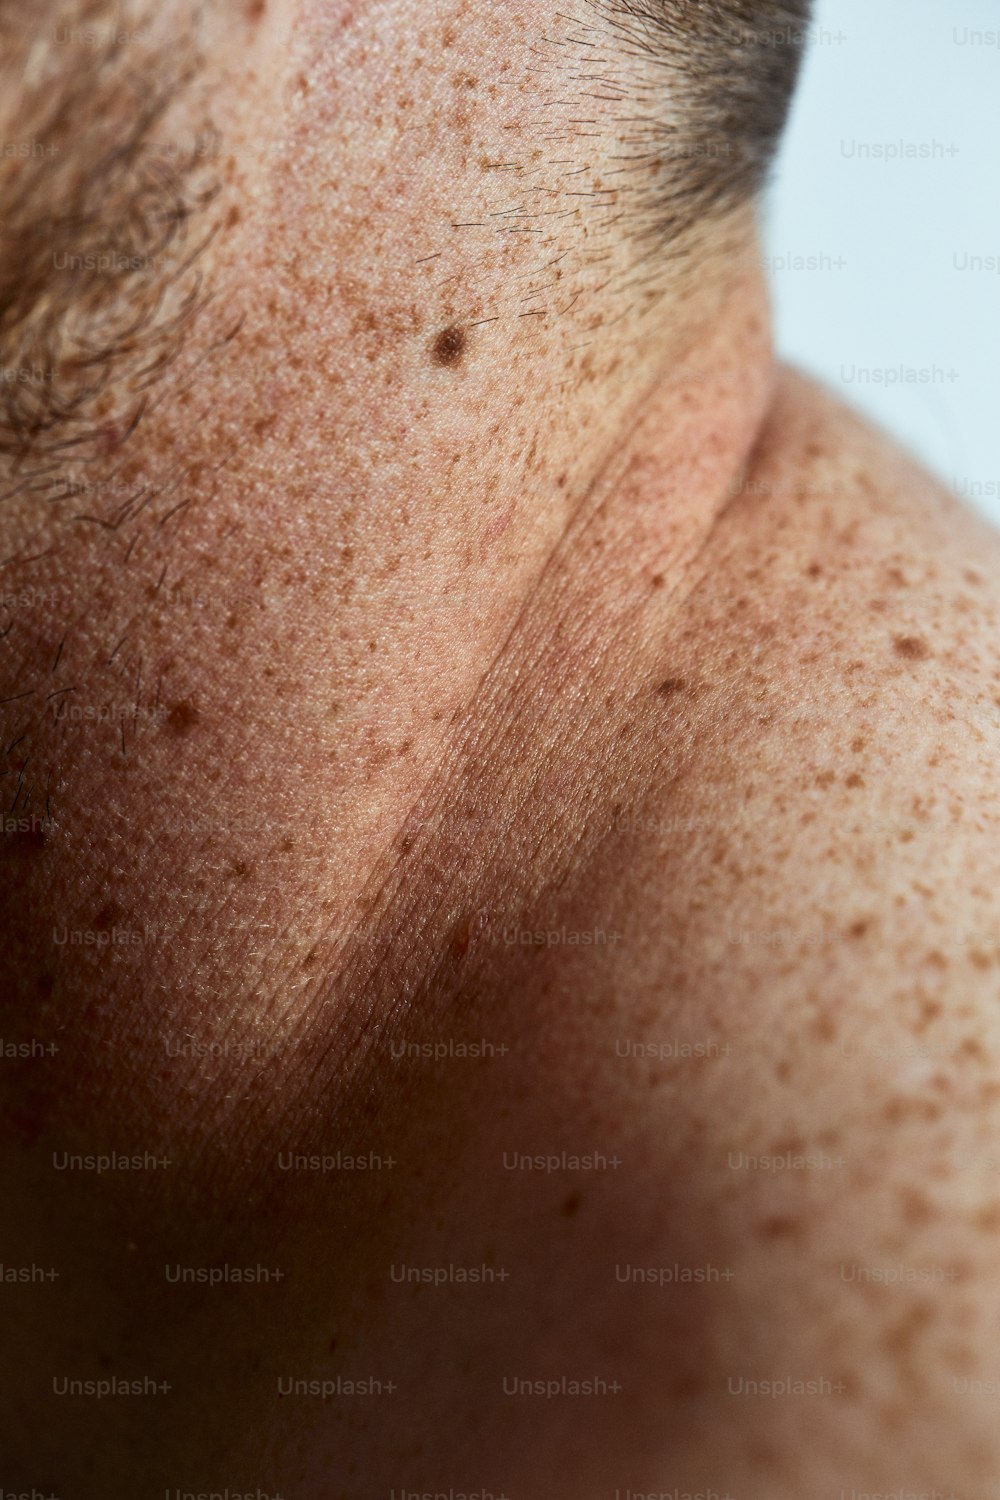 the back of a man's head with freckles on it